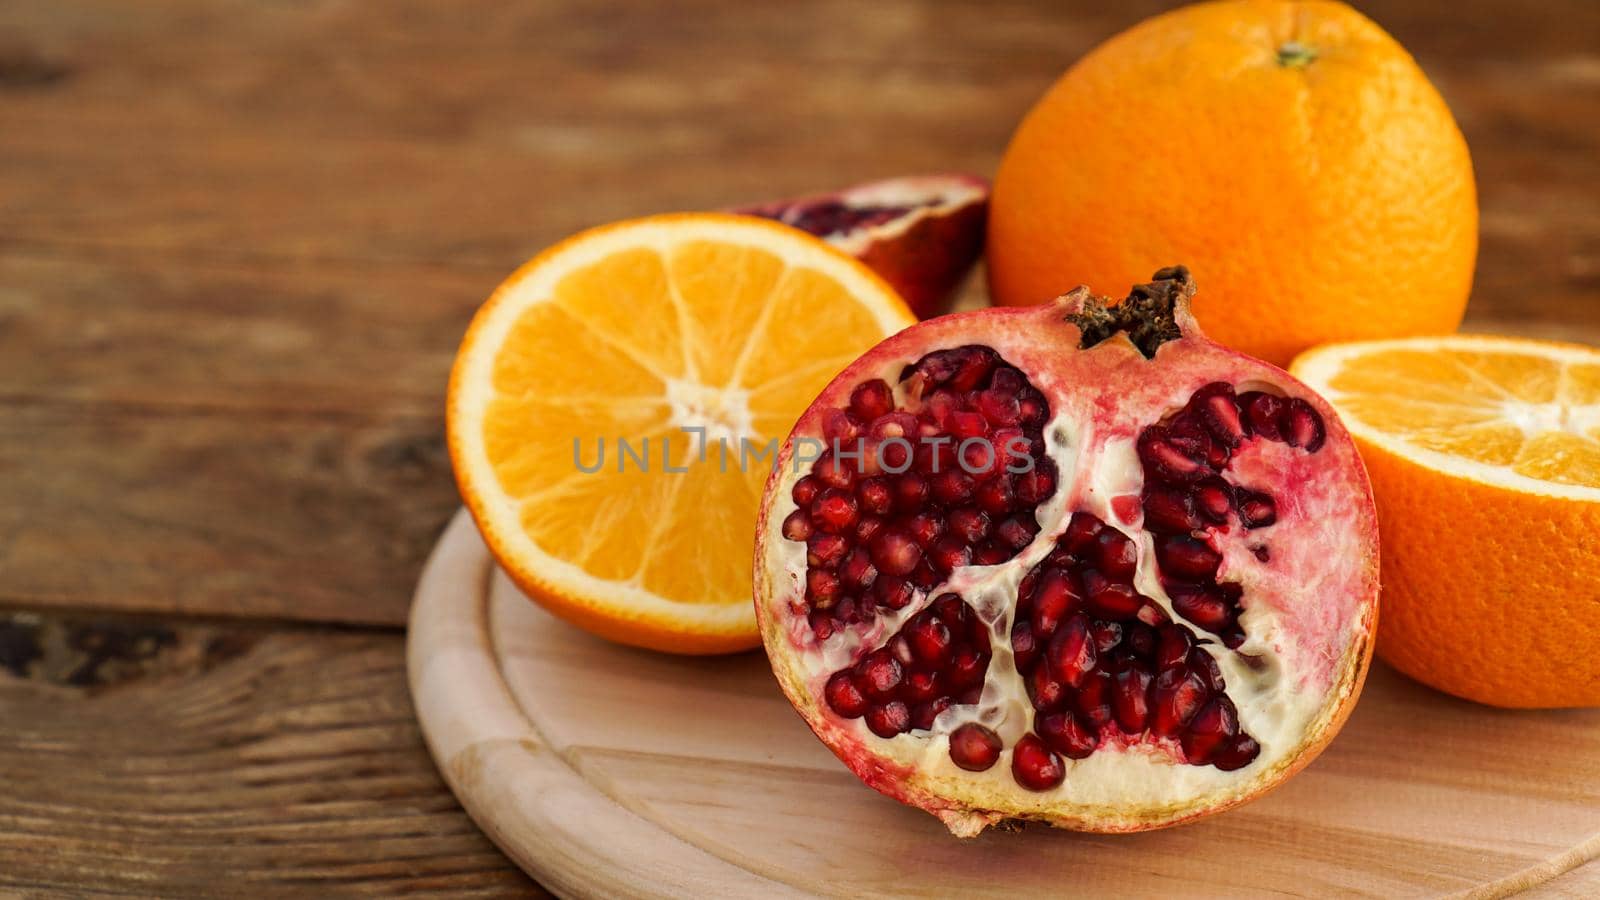 Pomegranate and oranges on a wooden background. Cut fruit by natali_brill